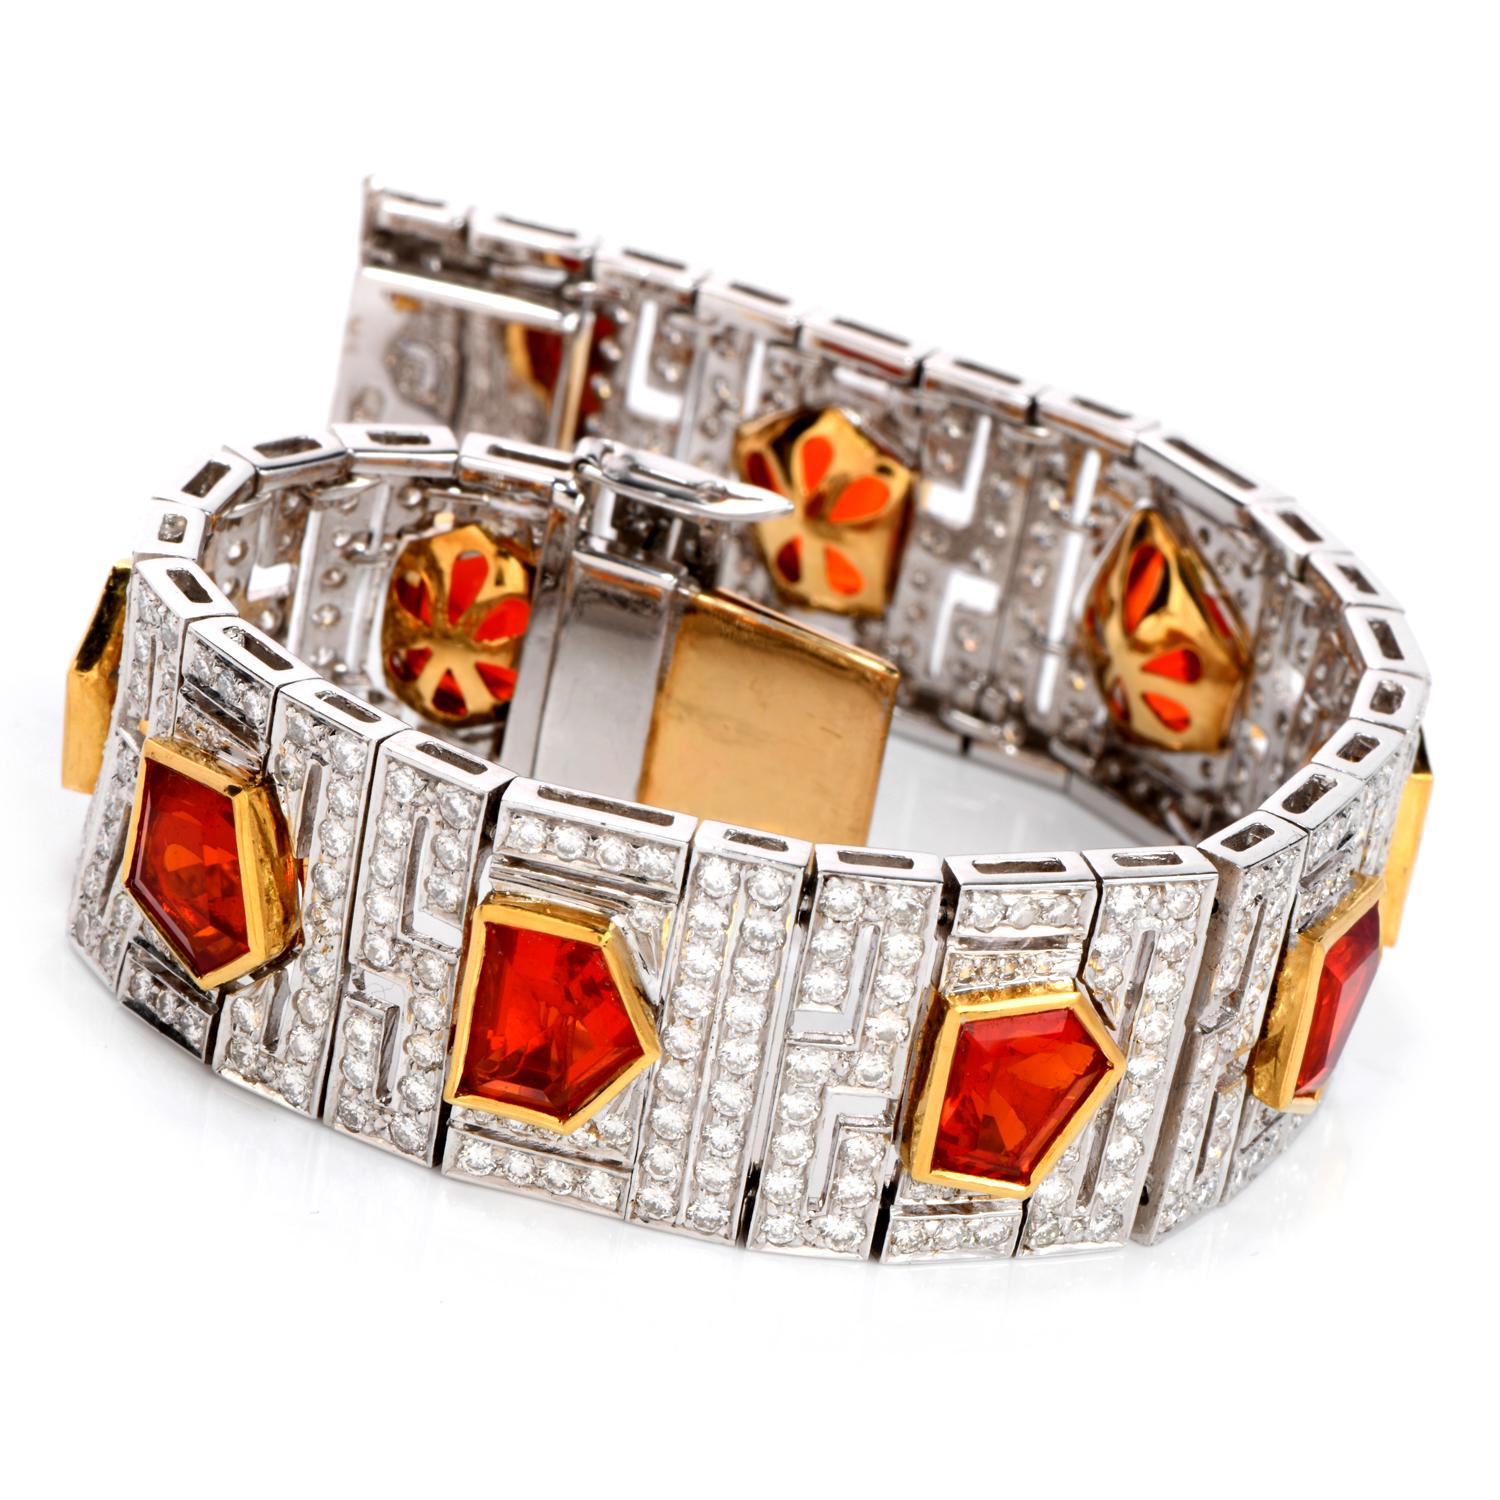 Shine vividly with this stunning vinatge Art Deco Design Diamond Fire Opal 18K Gold Deco Wide Bracelet! 

It is crafted in 18 karat white and yellow gold and is purity marked.  There are bright genuine diamonds, round cut, pave set, that create the